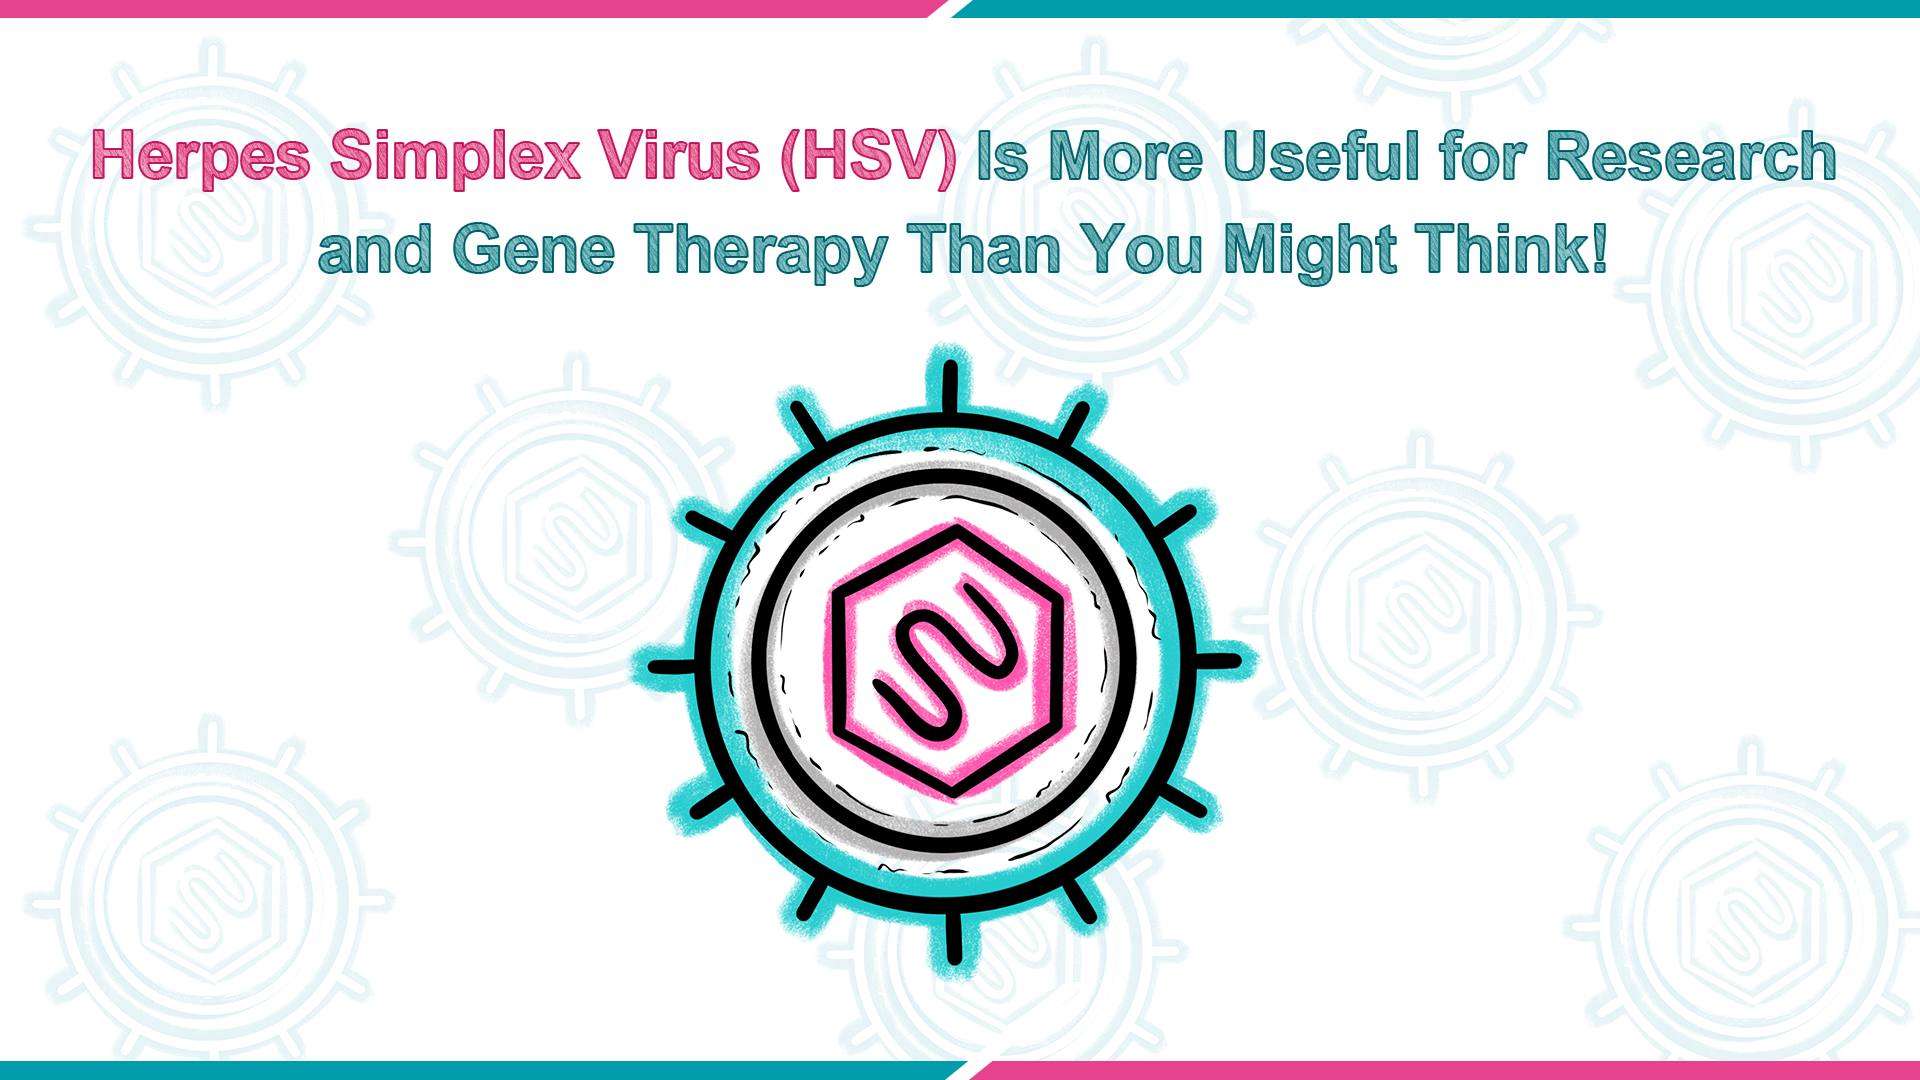 Herpes Simplex Virus (HSV) Is More Useful for Research and Gene Therapy Than You Might Think_VectorBuilder